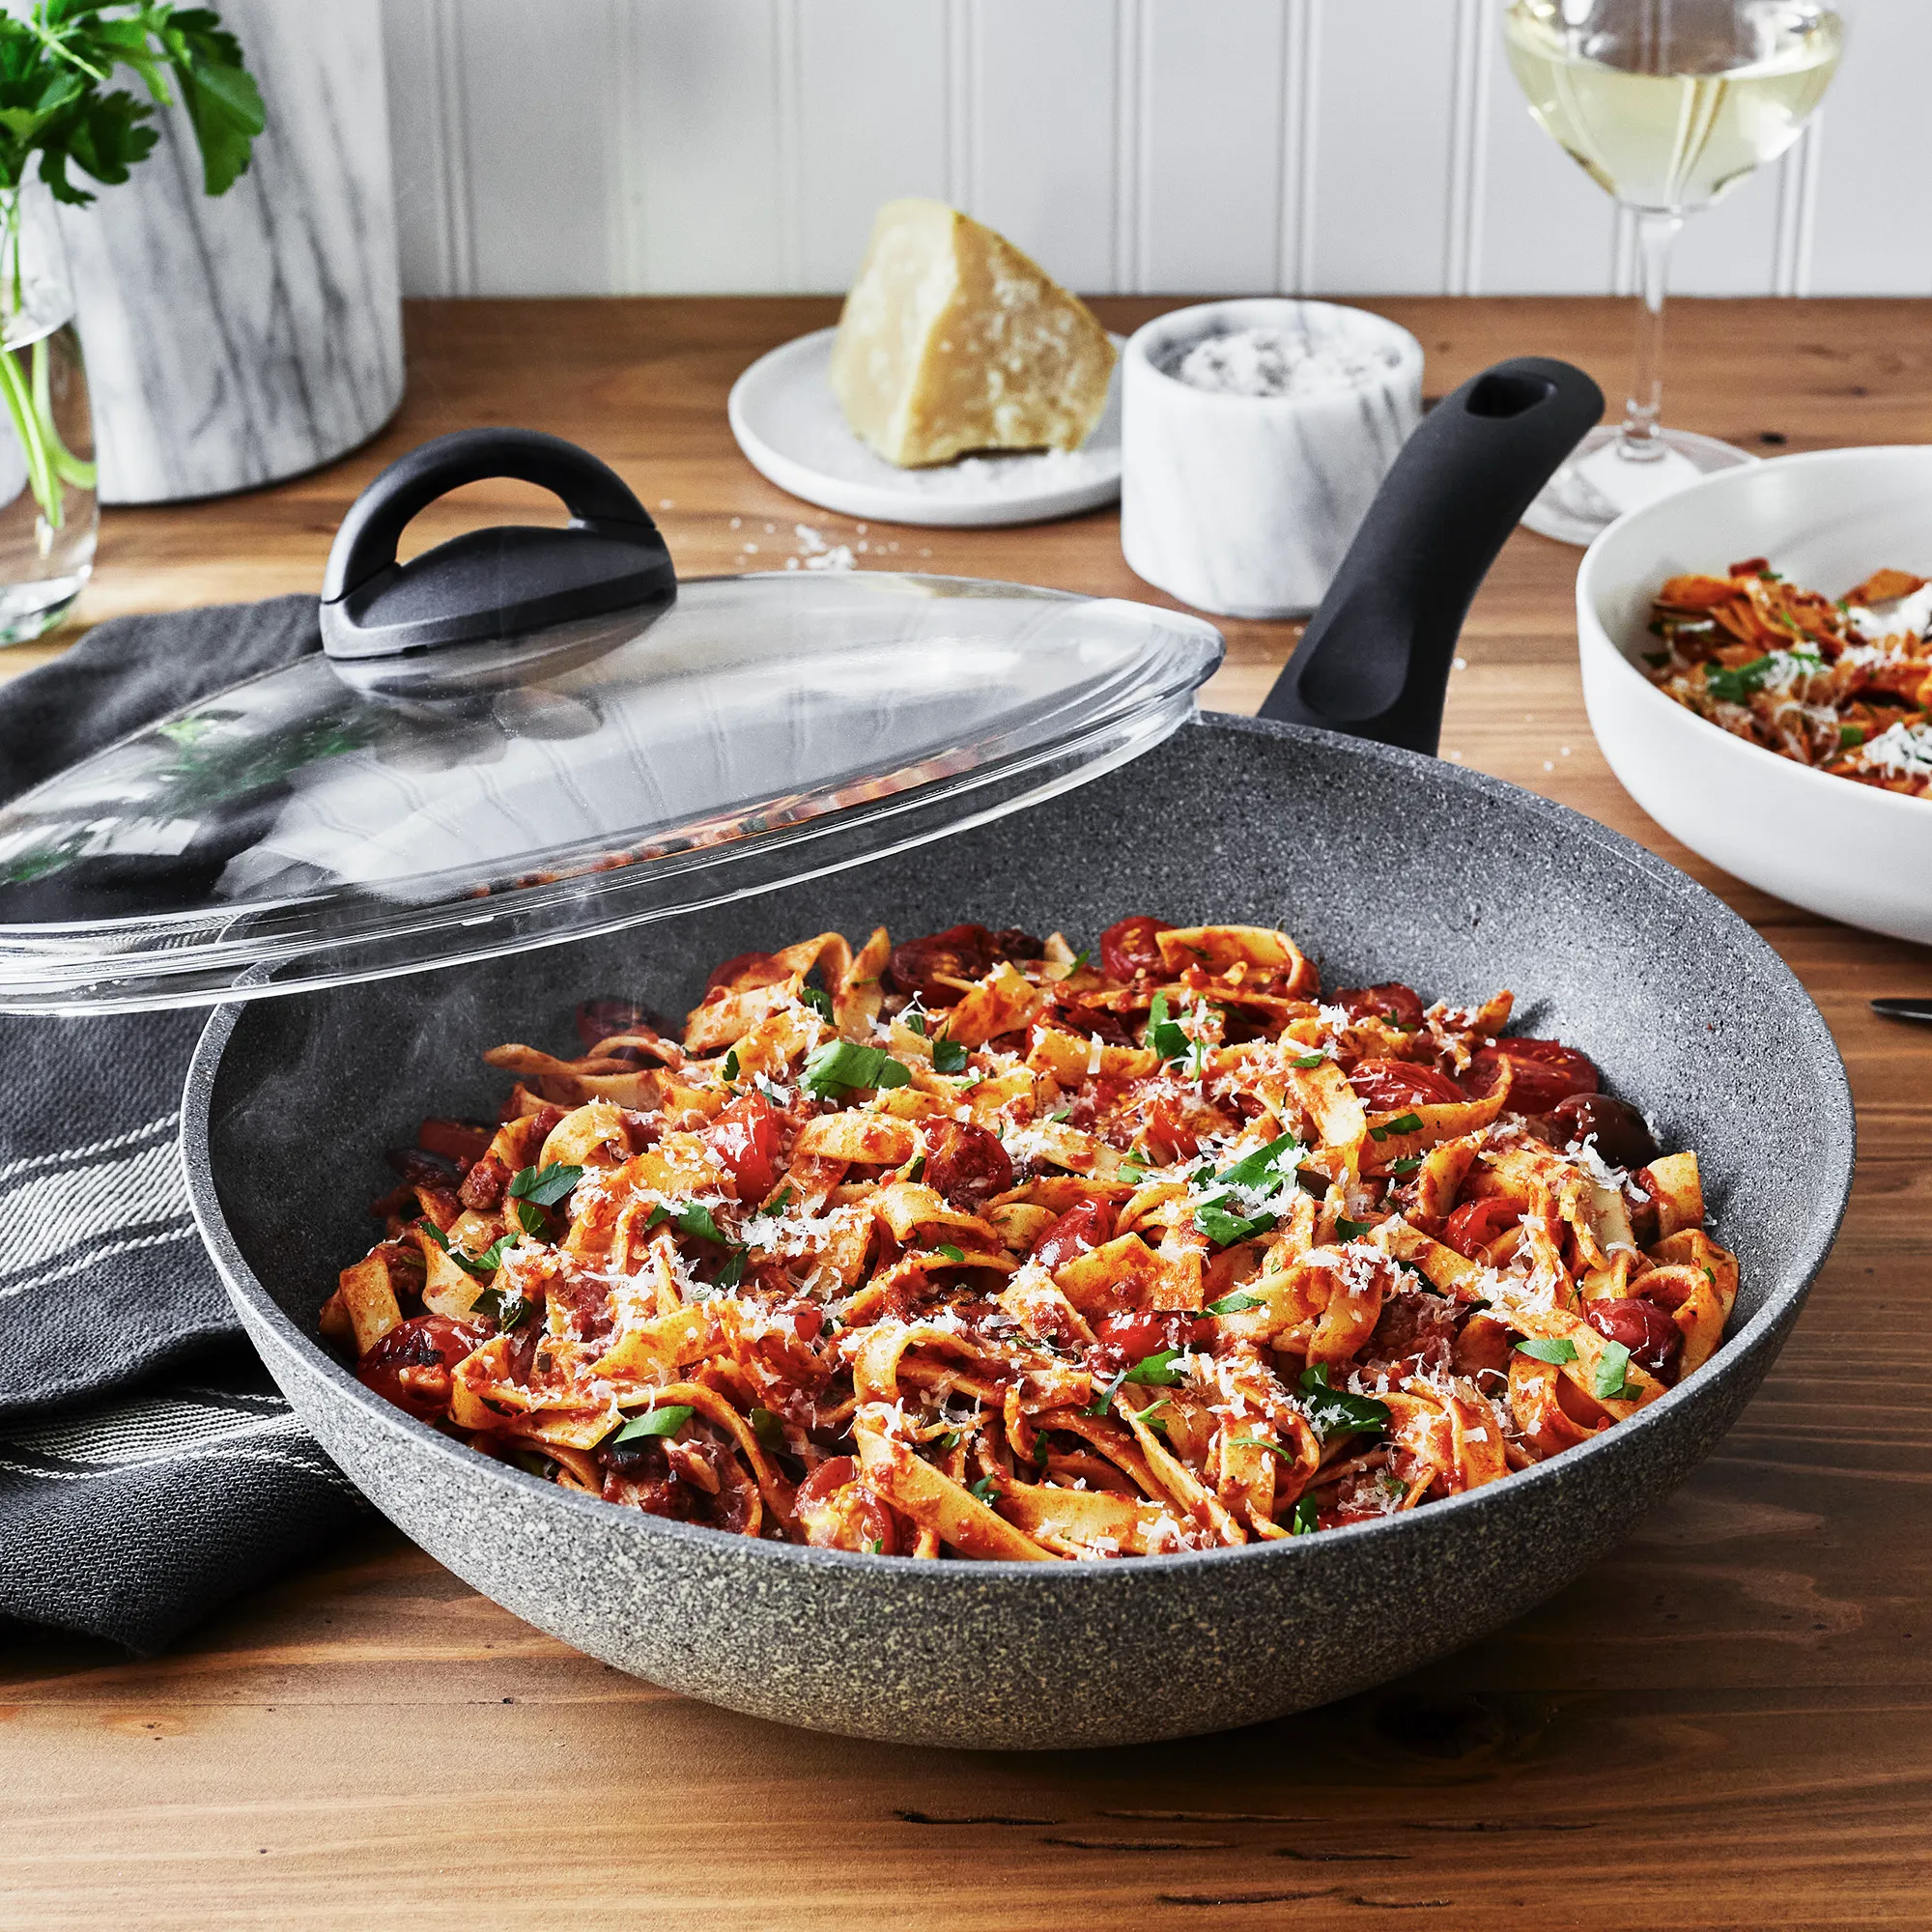  BALLARINI Parma by HENCKELS 3-pc Nonstick Pot and Pan Set, Made  in Italy, Set includes 8-inch, 10-inch and 12-inch fry pan: Home & Kitchen